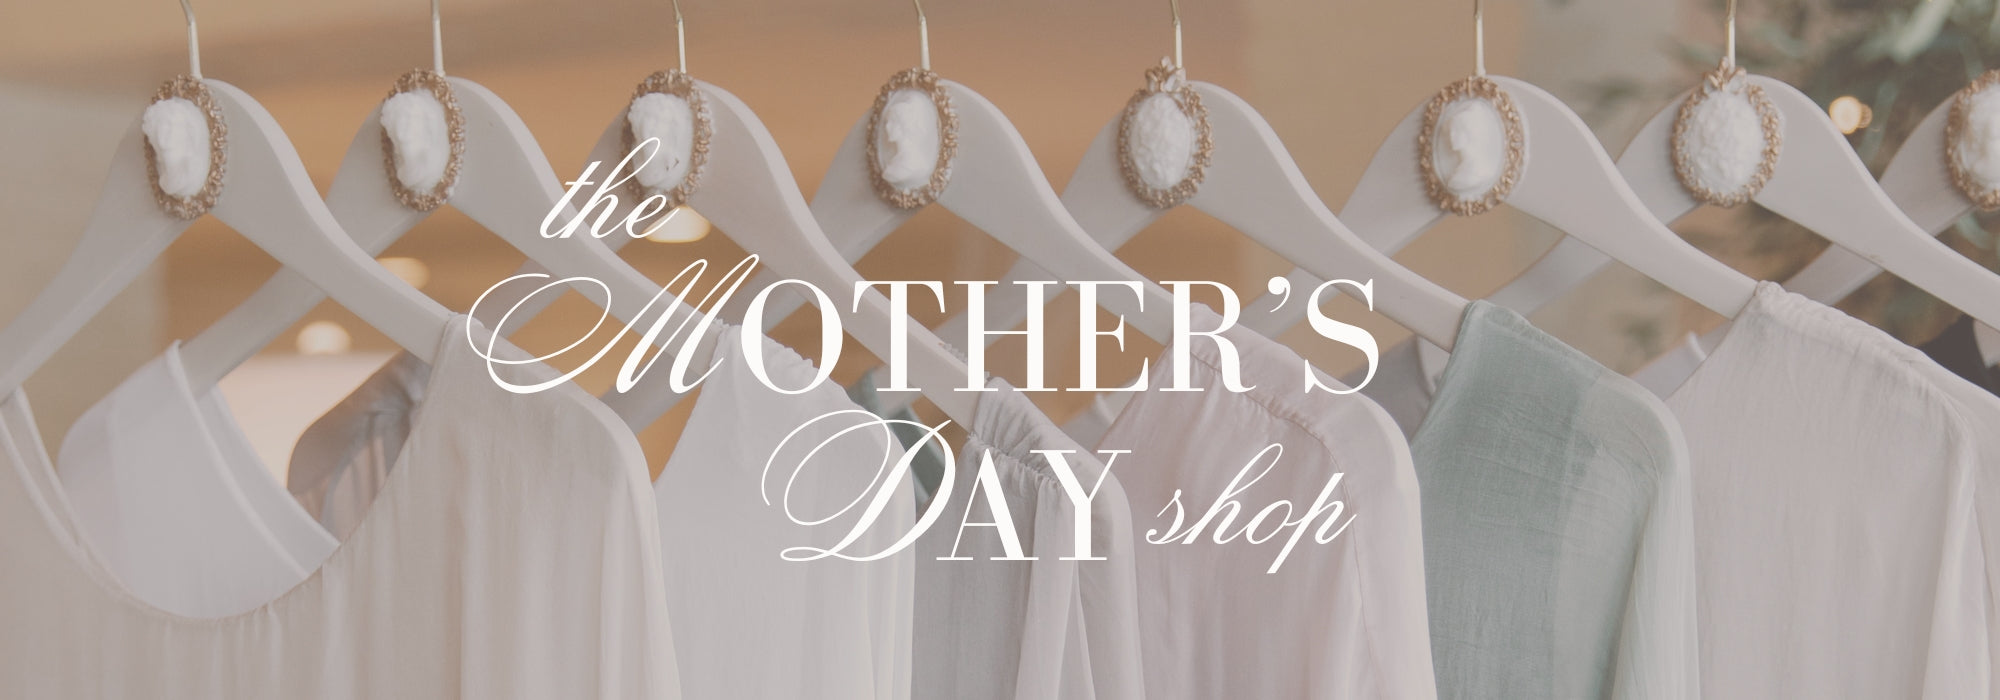 The Mother's Day Shop